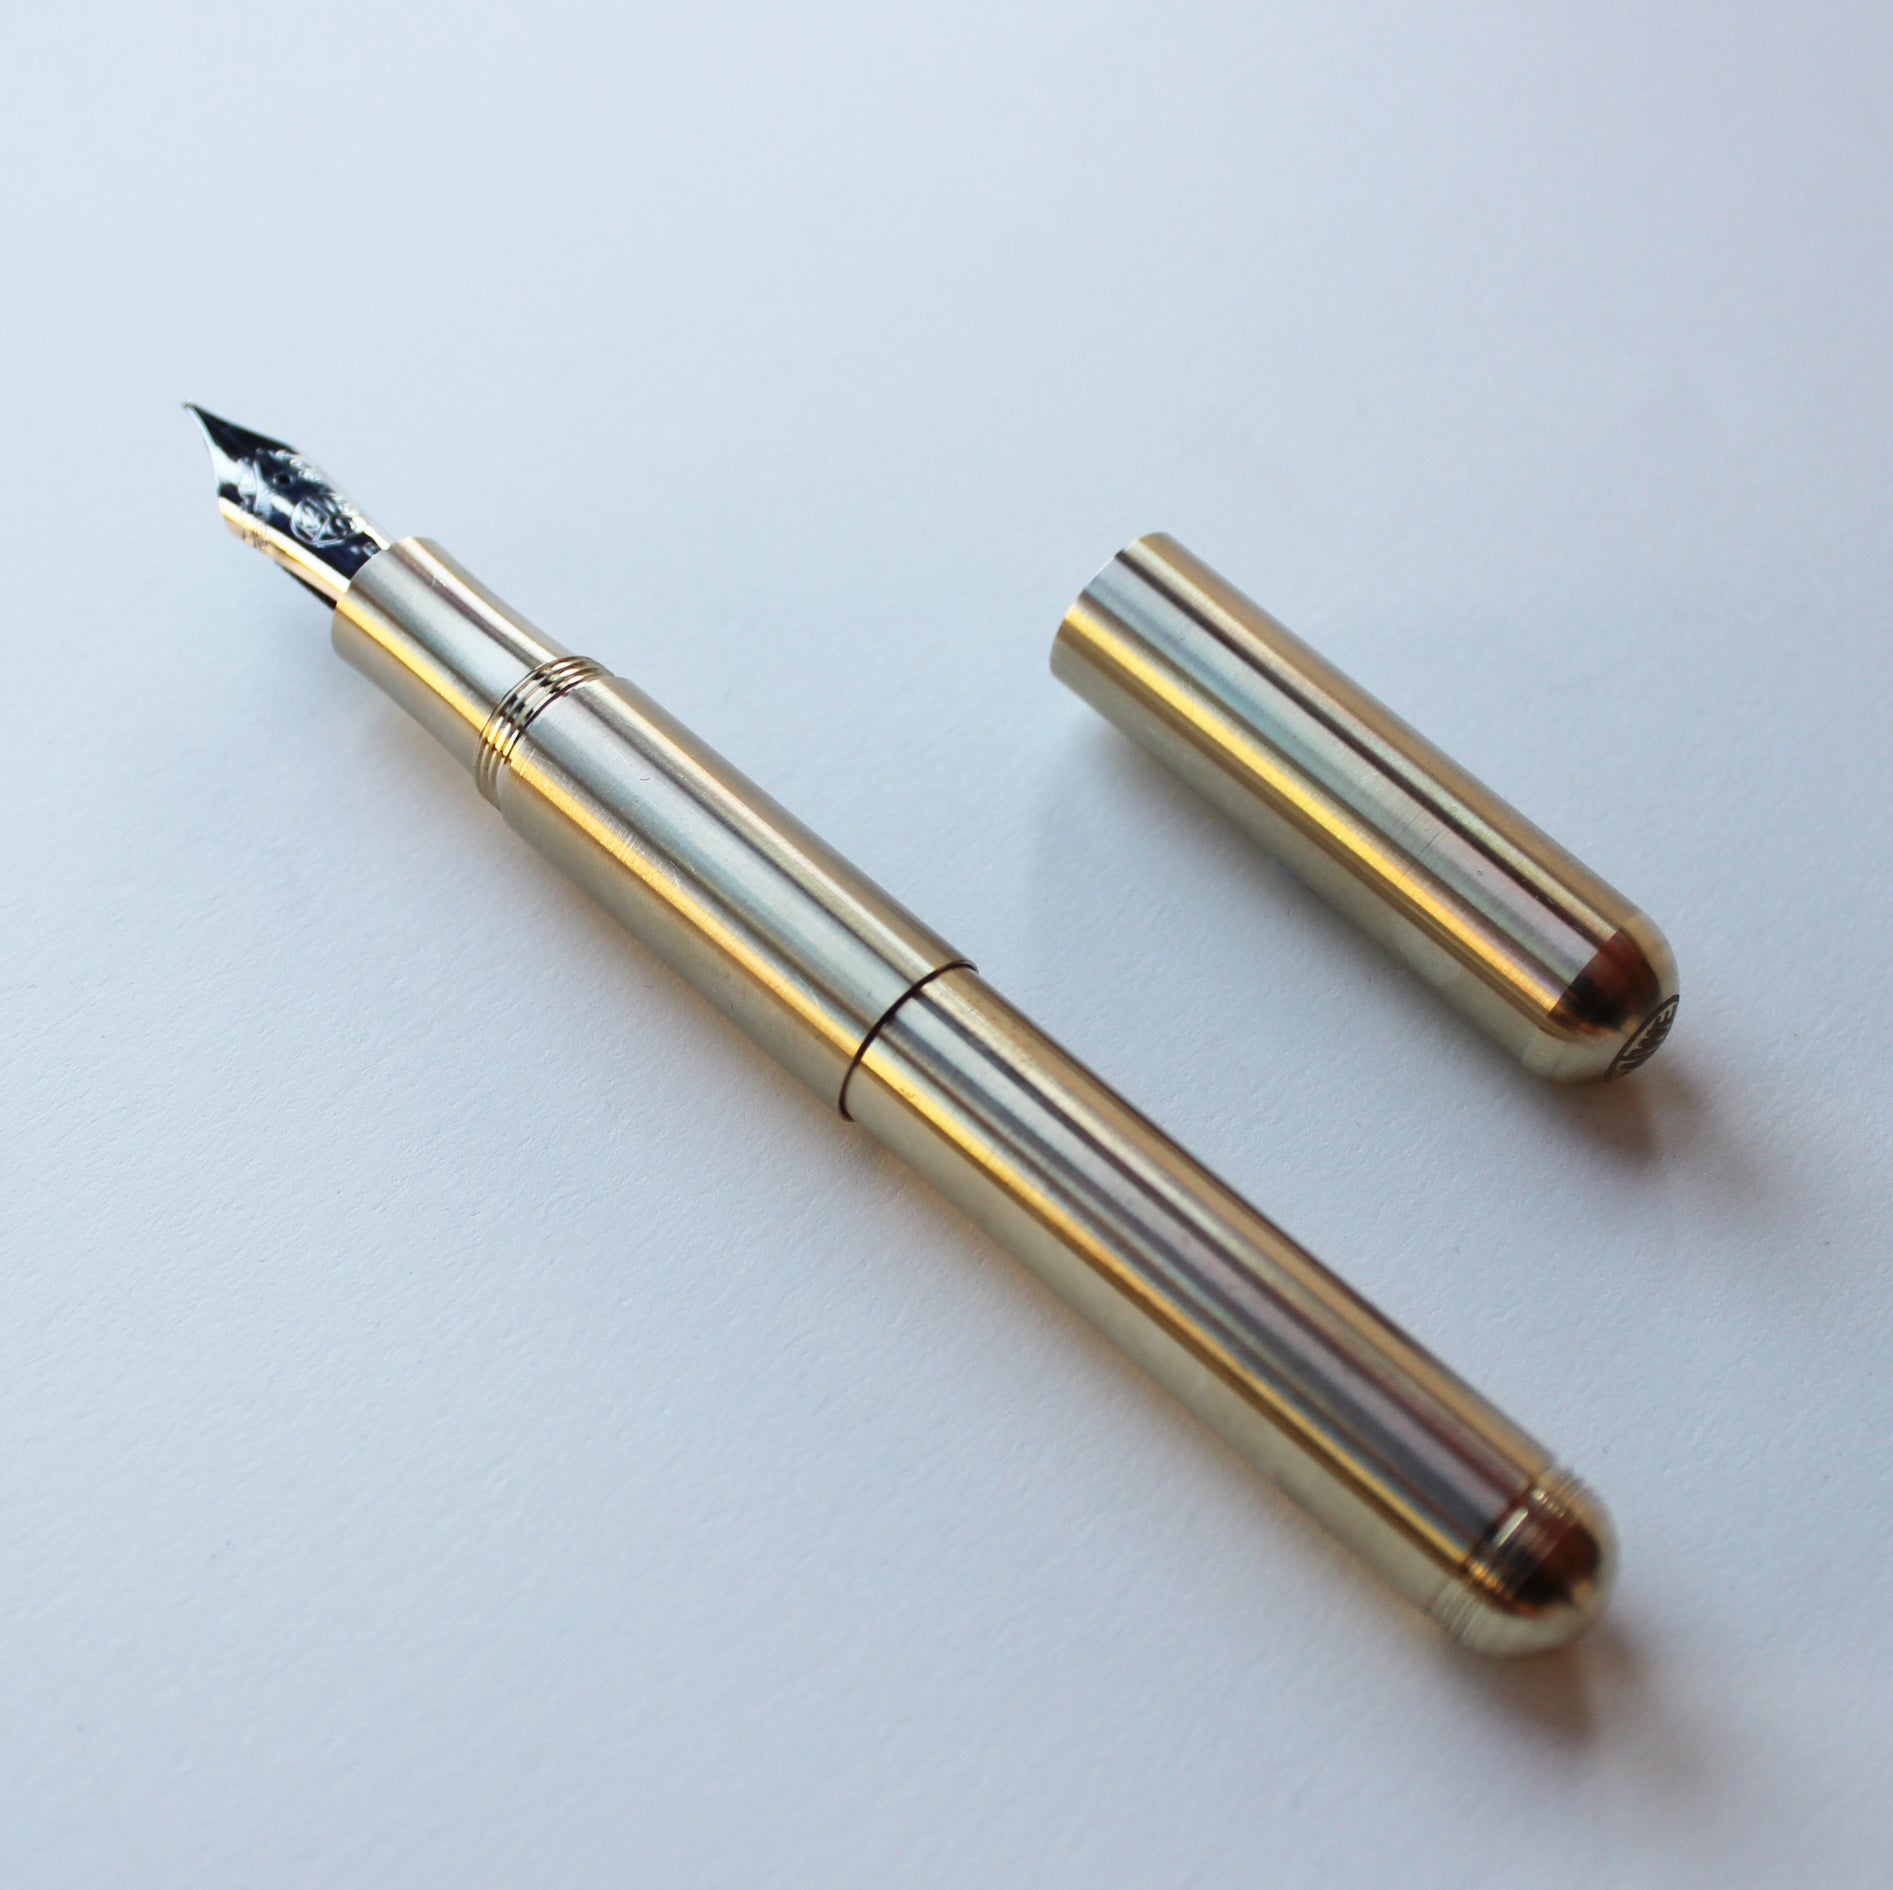 Kaweco Brass Supra Fountain Pen with cap by side